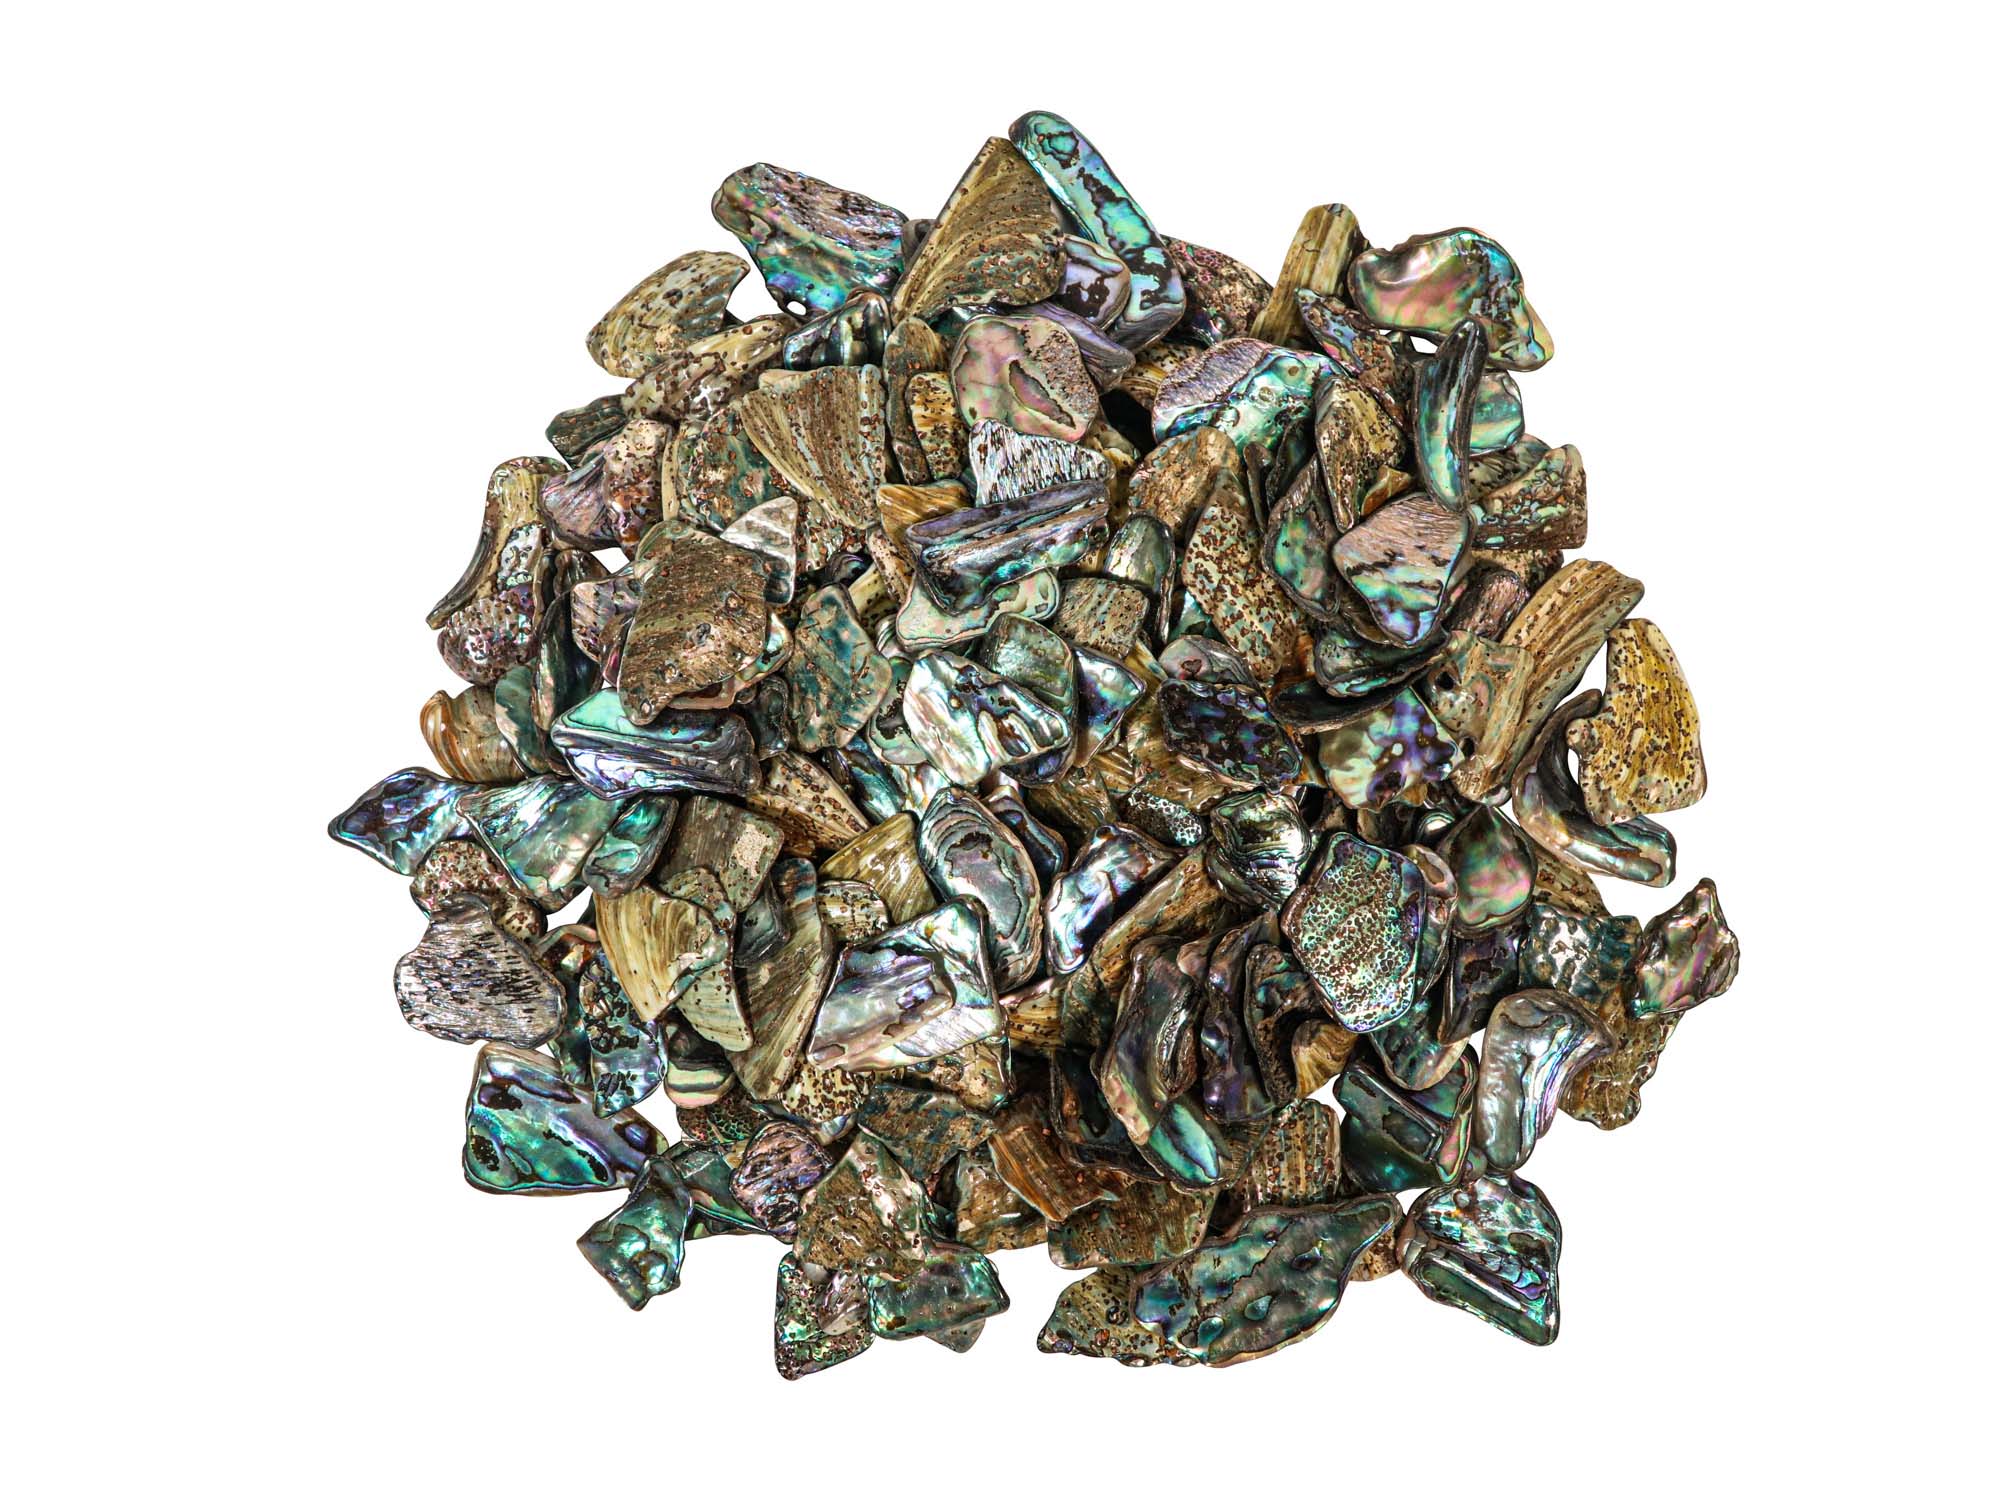 Highly Polished Paua Shell Pieces: Medium 25-45mm (1 kg or 2.2 lbs) 